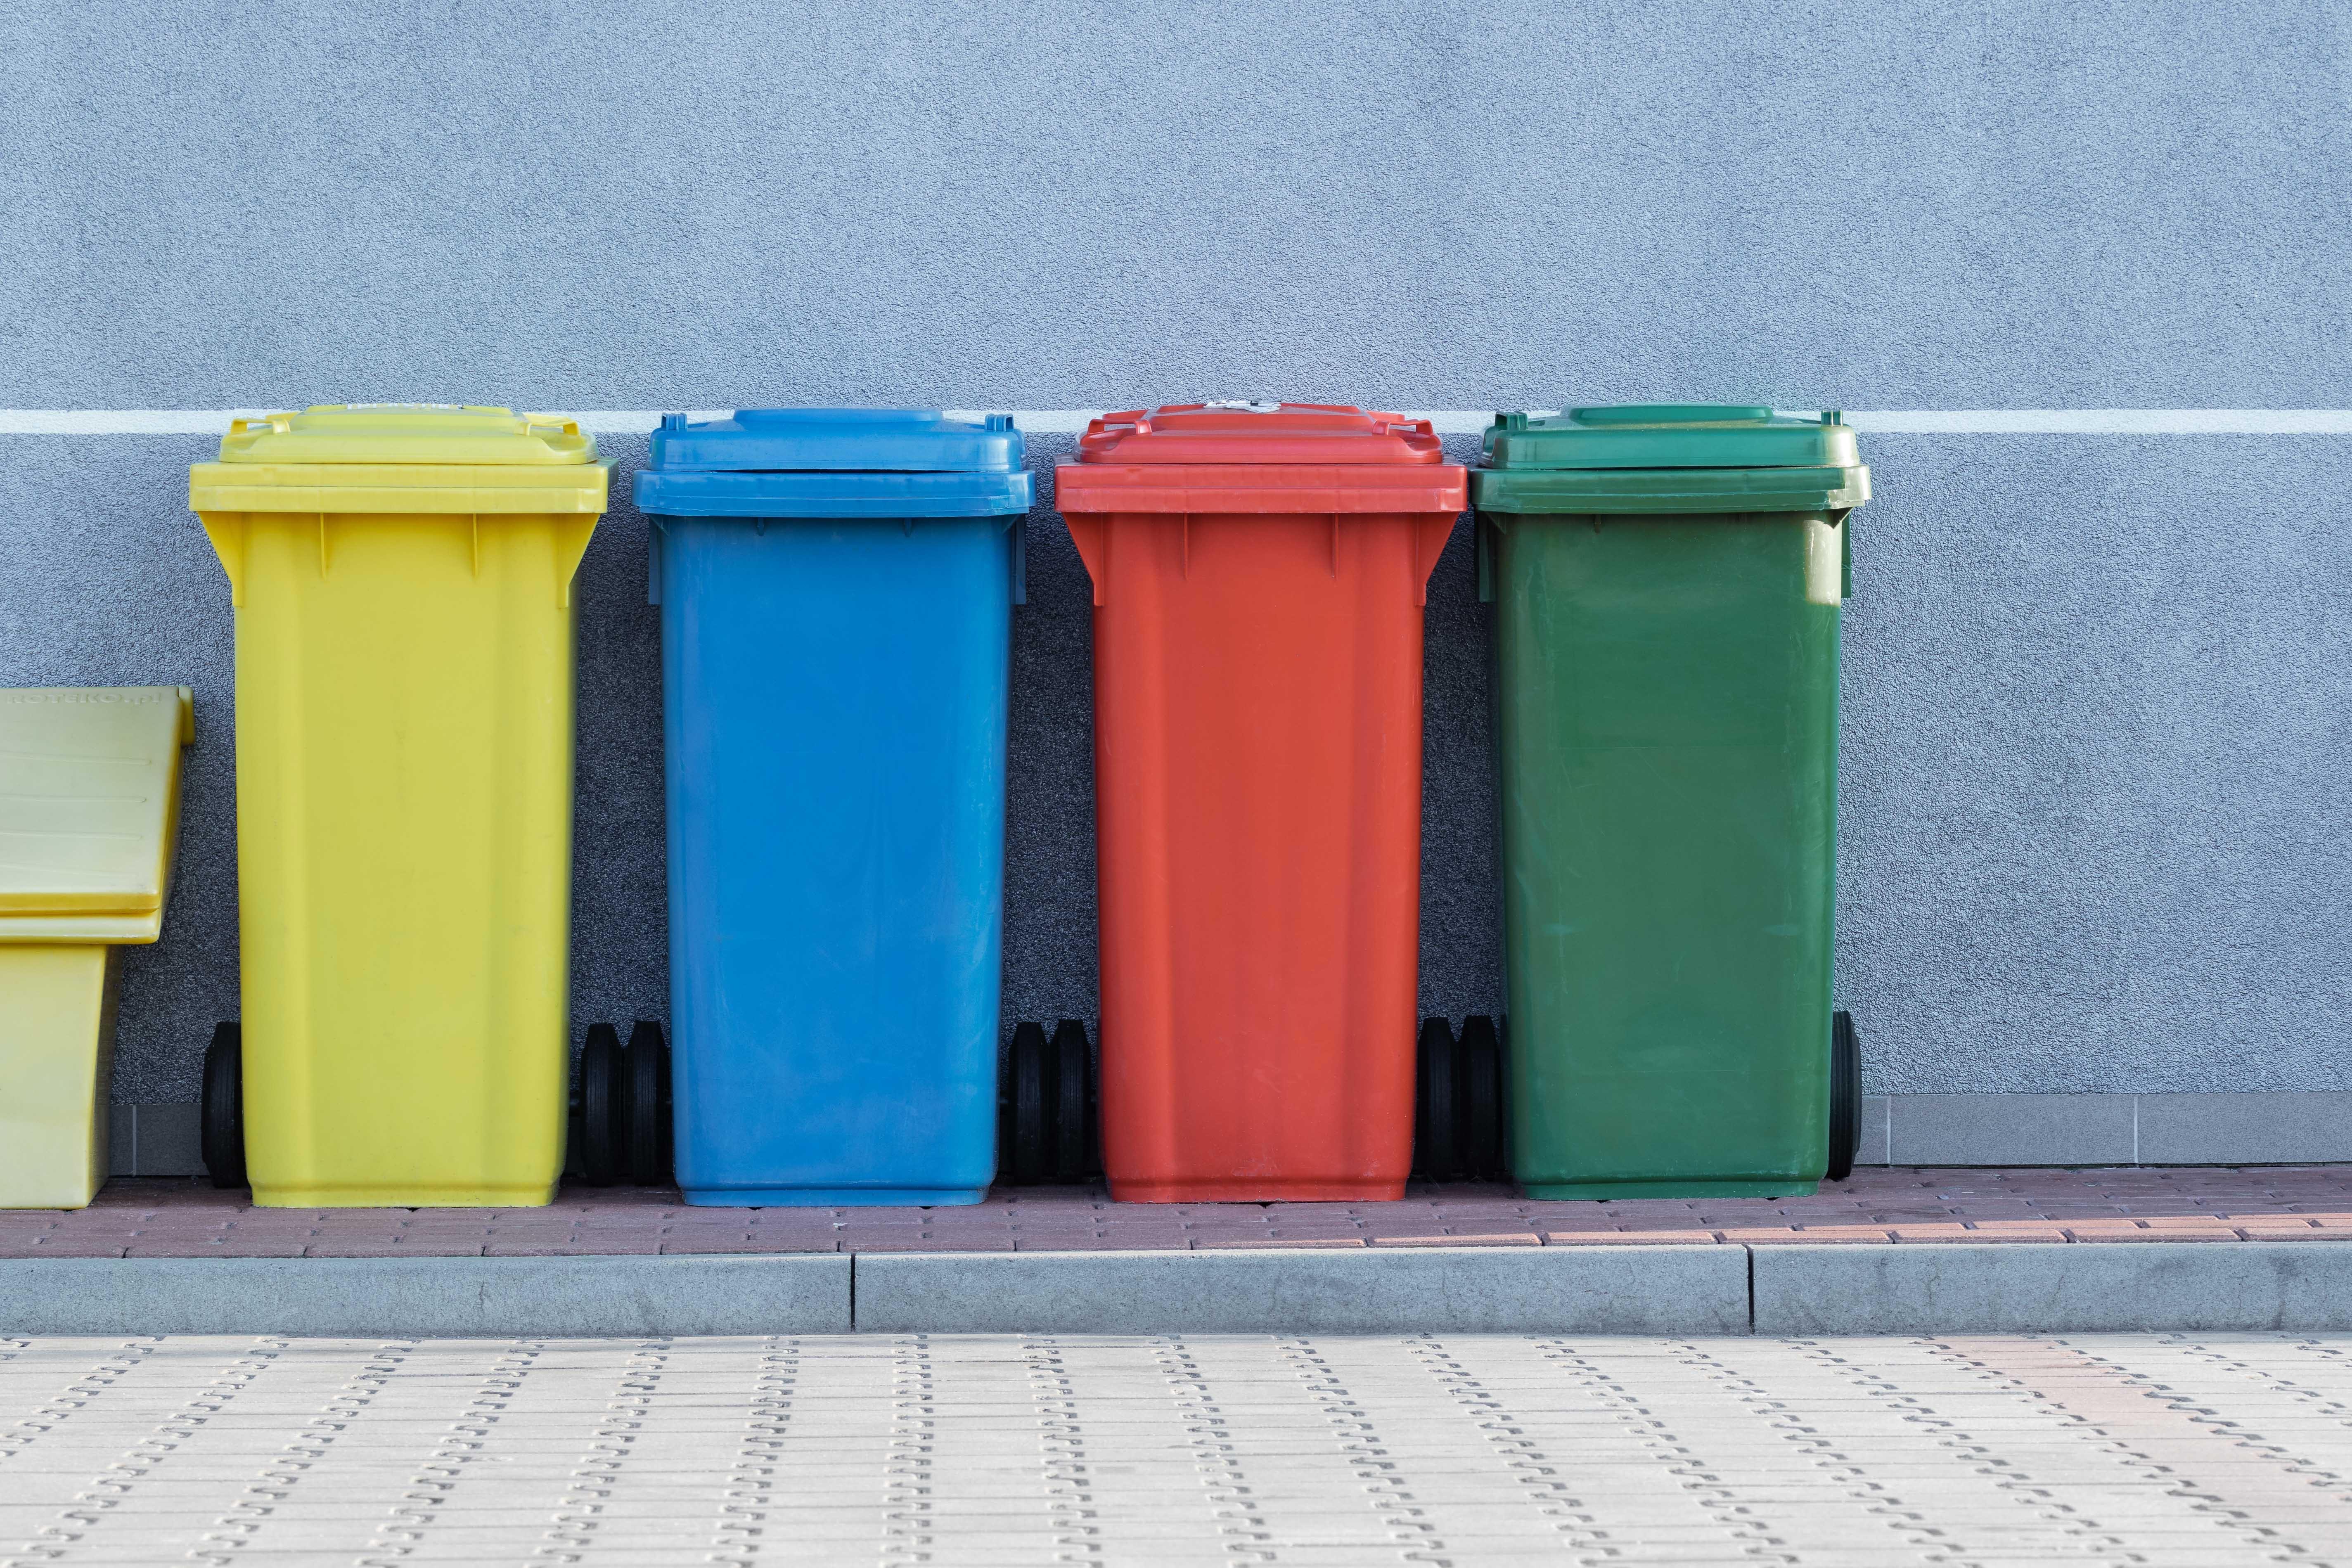 A yellow, blue, red and green bin in a line on the side of the road.